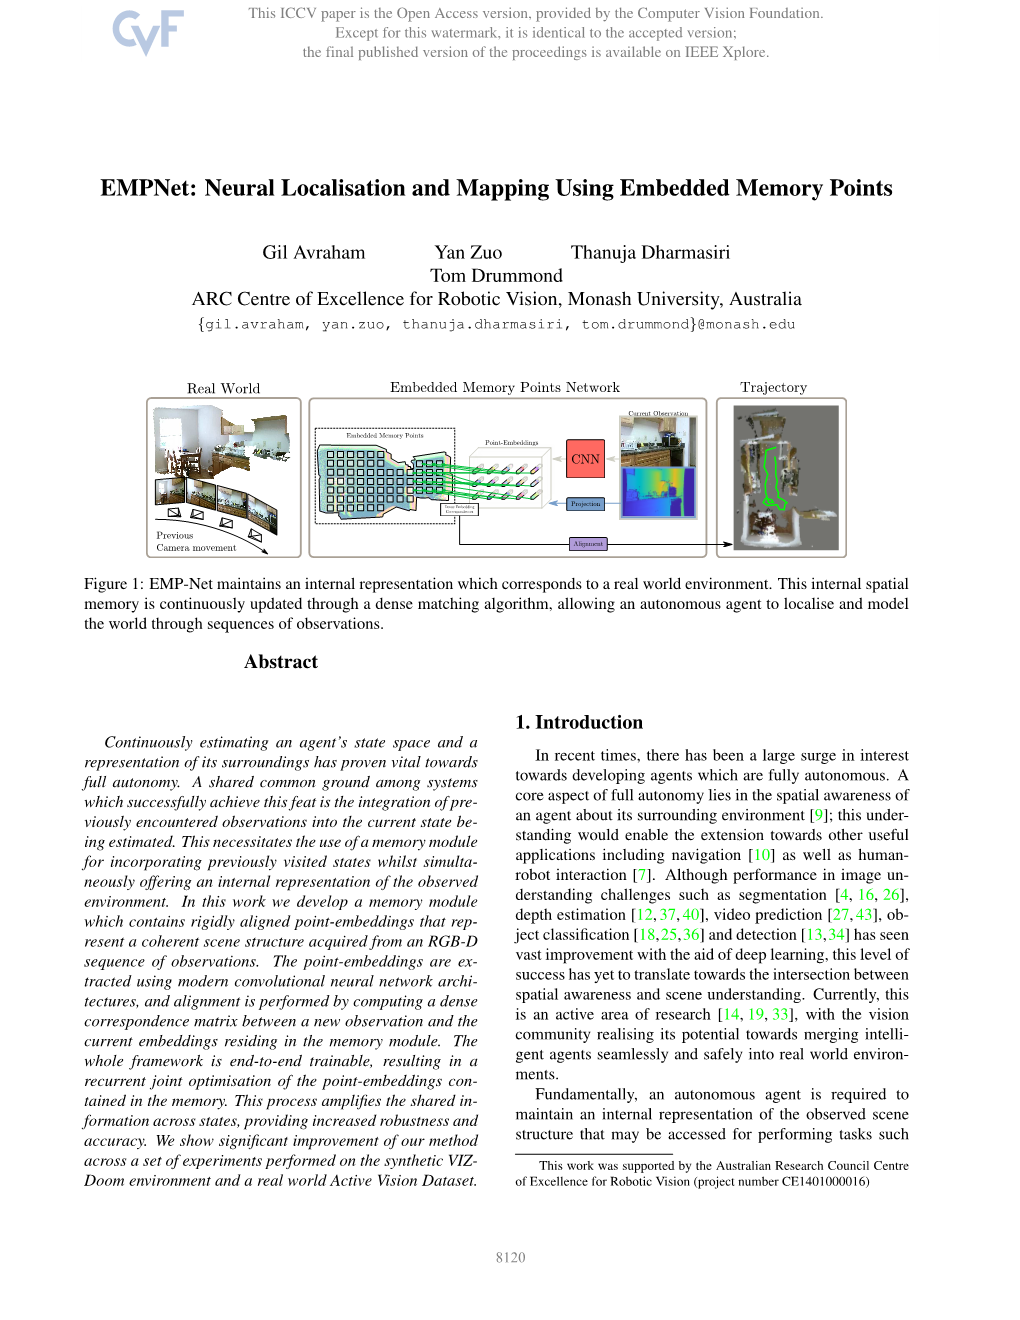 Empnet: Neural Localisation and Mapping Using Embedded Memory Points